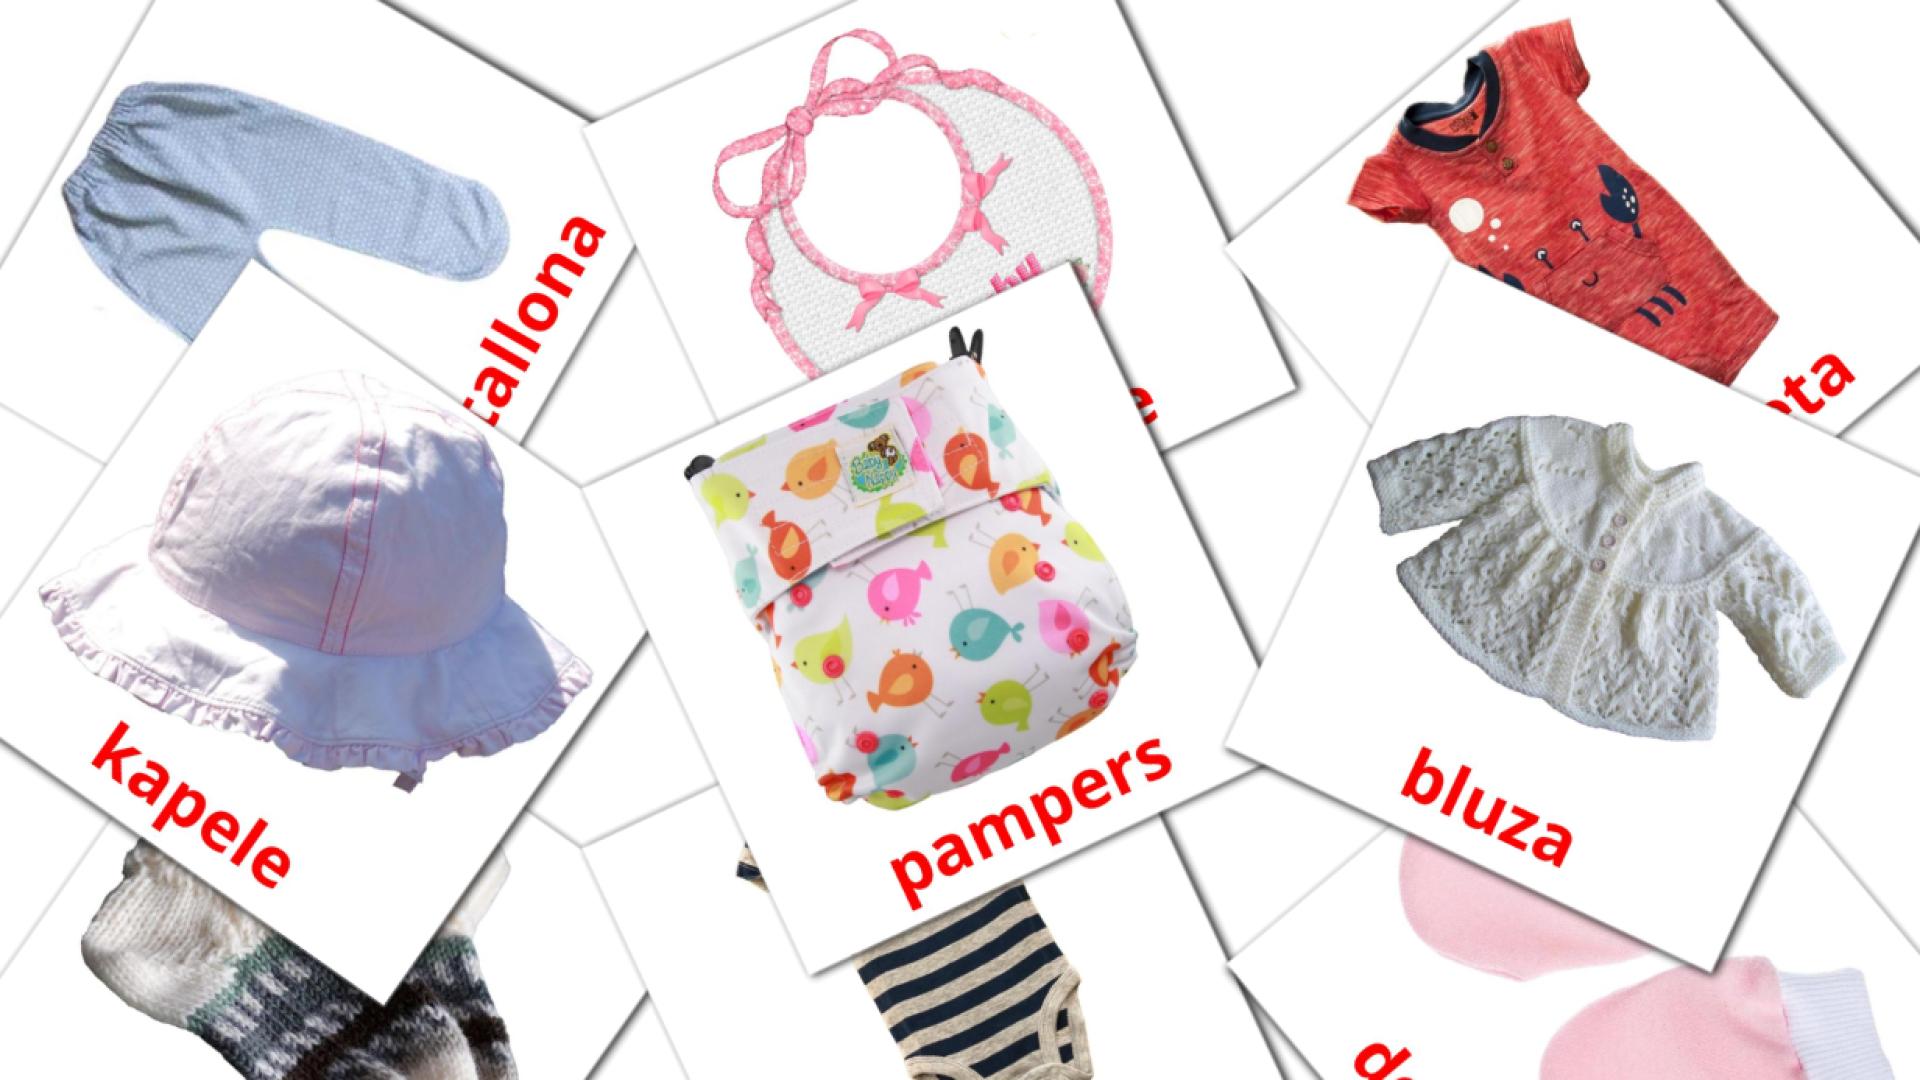 Baby clothes - albanian vocabulary cards